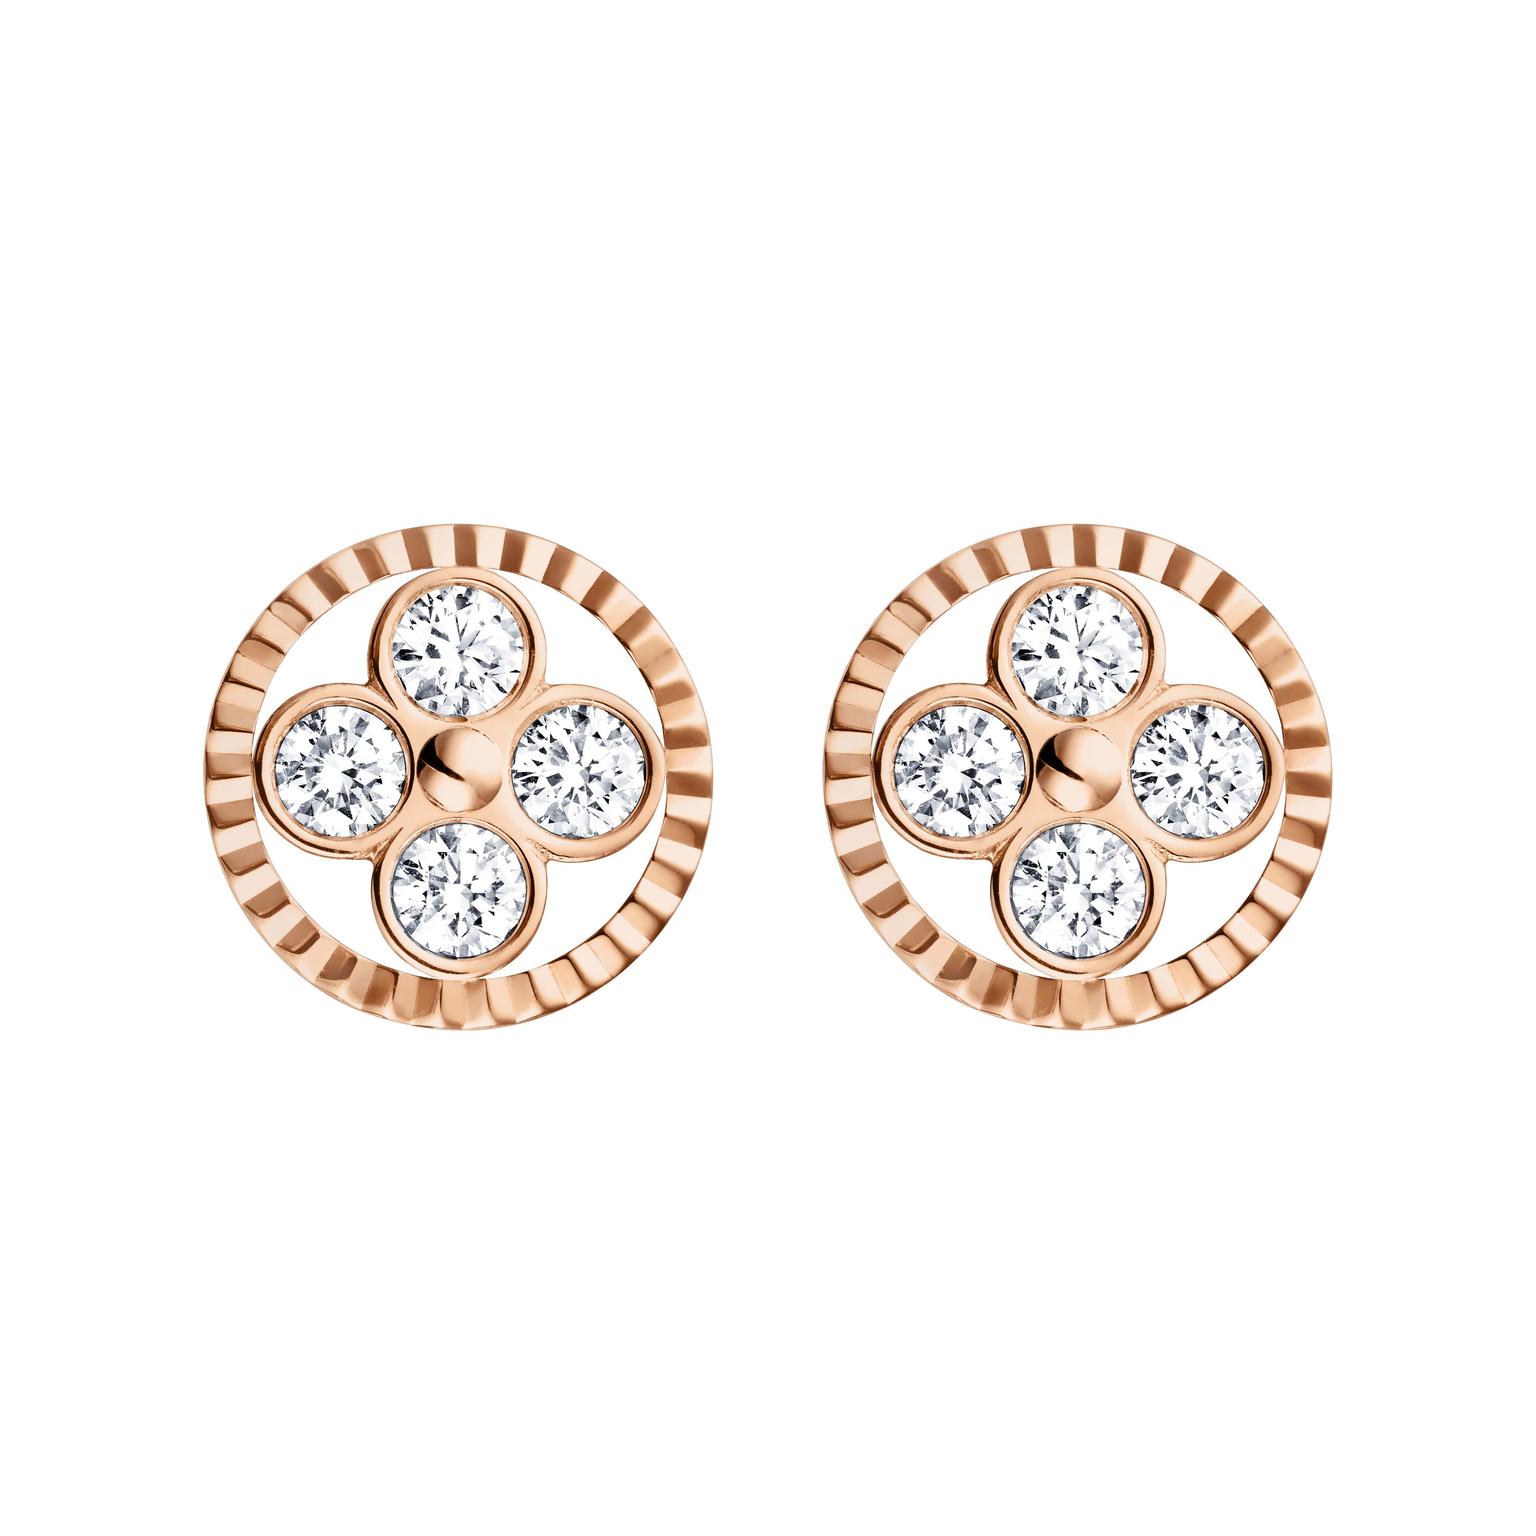 Louis Vuitton Monogram Sun earrings in rose gold. The circle surrounding the round-petal quatrefoil diamond flower is fluted to create a mirage of light.